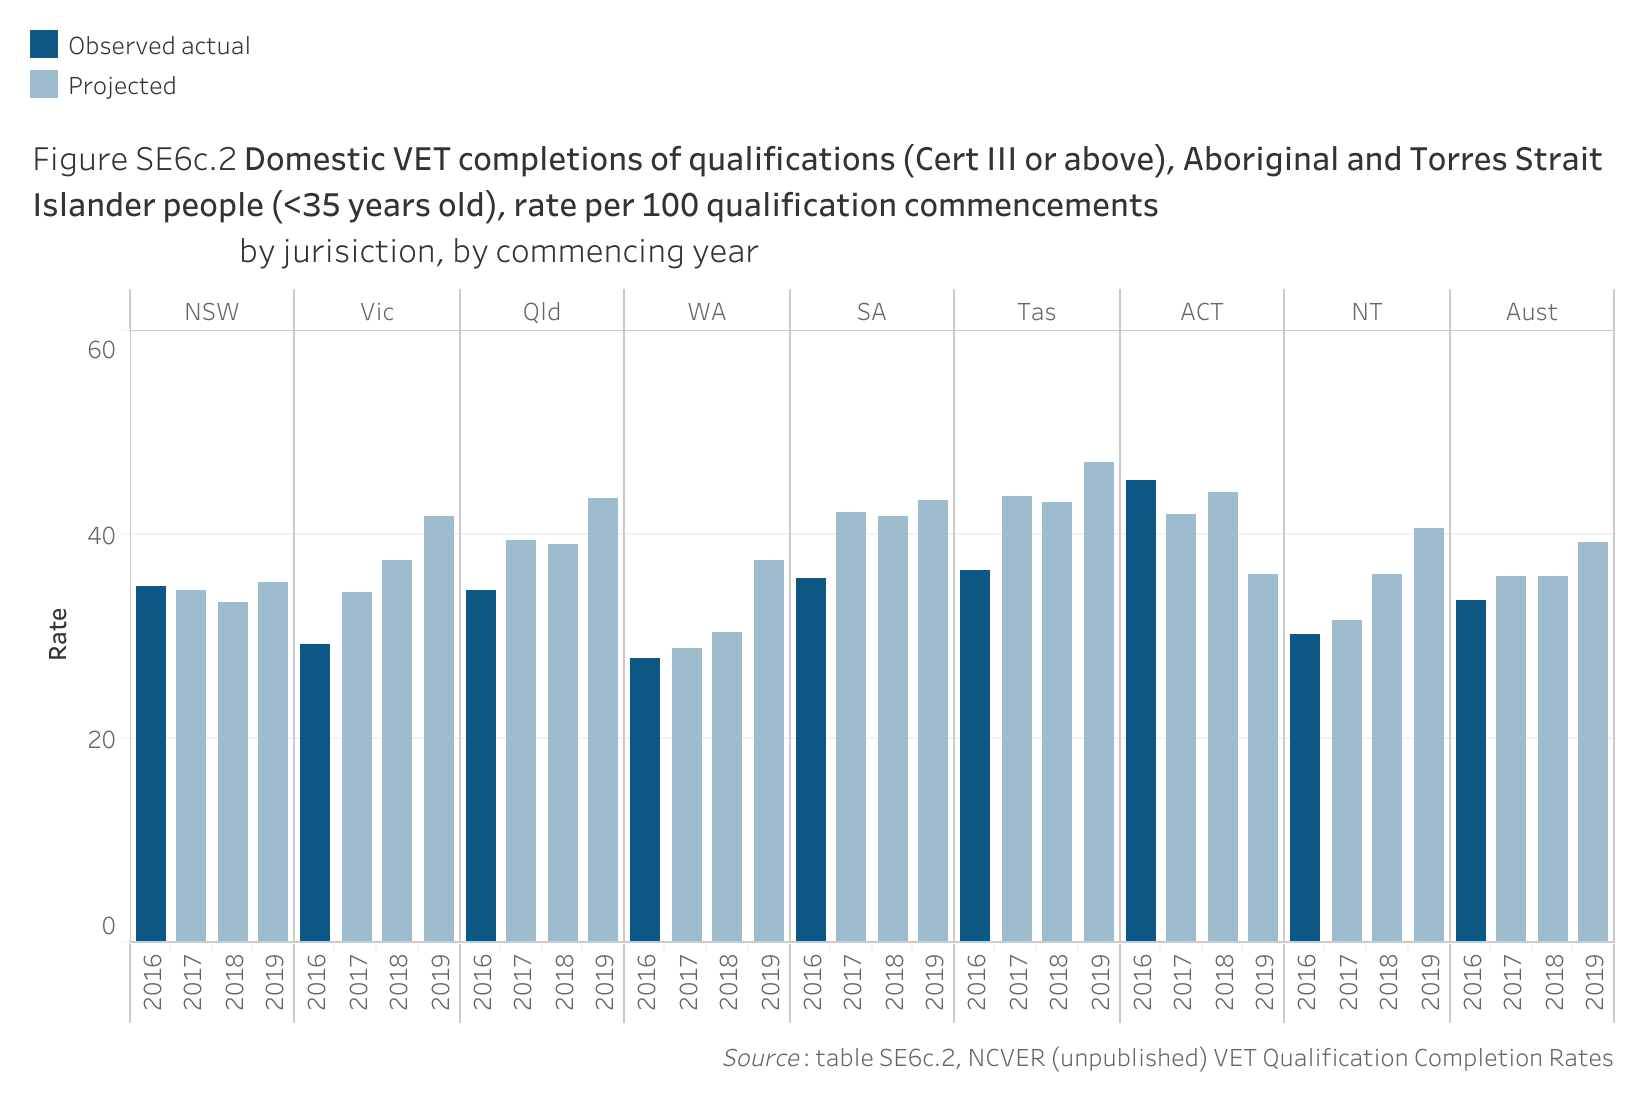 Figure SE6c.2. Bar chart showing the completion rate per 100 qualification commencements of domestic Vocational Education and Training (VET) qualifications (Cert III or above) by Aboriginal and Torres Strait Islander people (<35 years old), by jurisdiction and by commencing year. Data table of figure SE6c.2 is below.